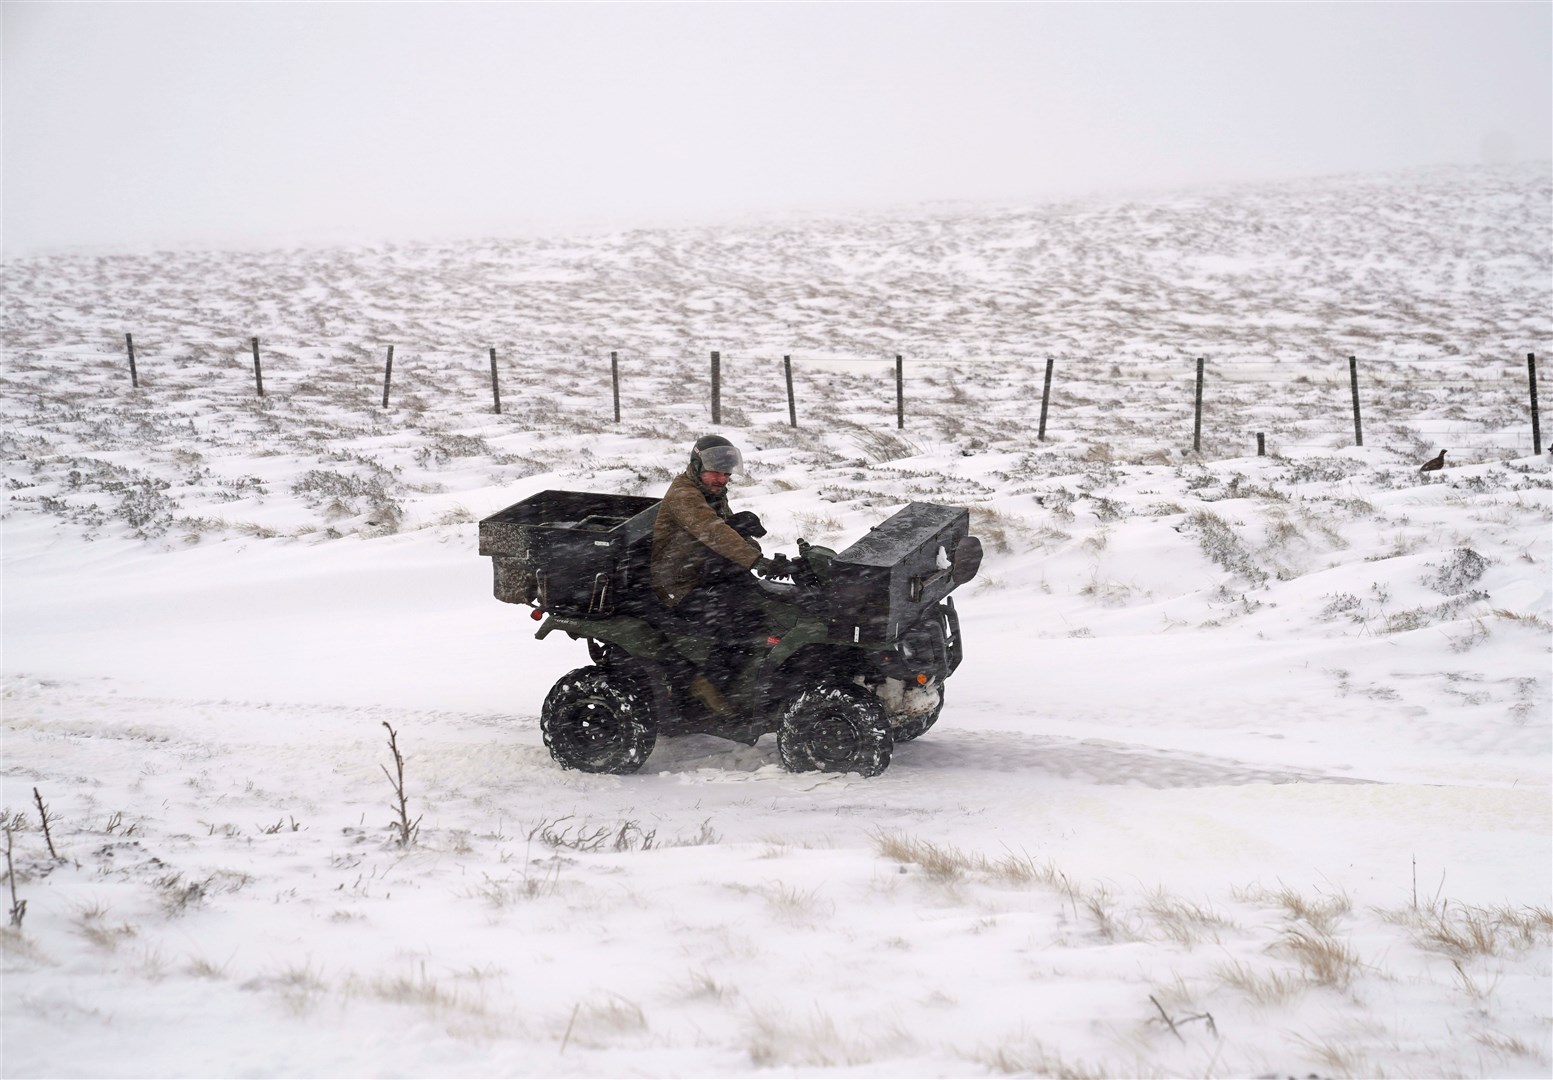 A quad bike helped this man get through the snow in Allenheads (Owen Humphreys/PA)